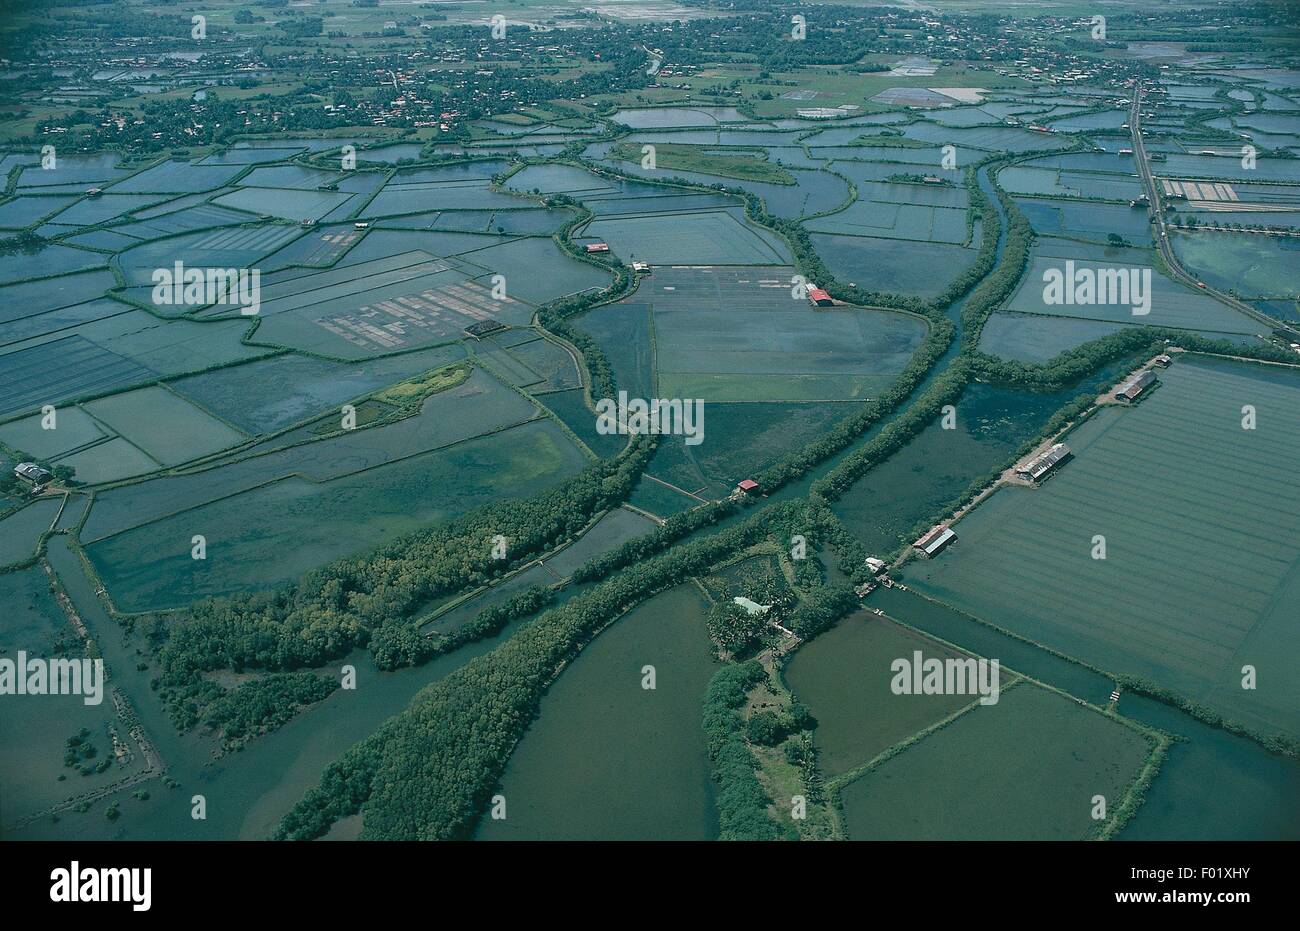 Aerial view of paddy fields in the Philippines Stock Photo